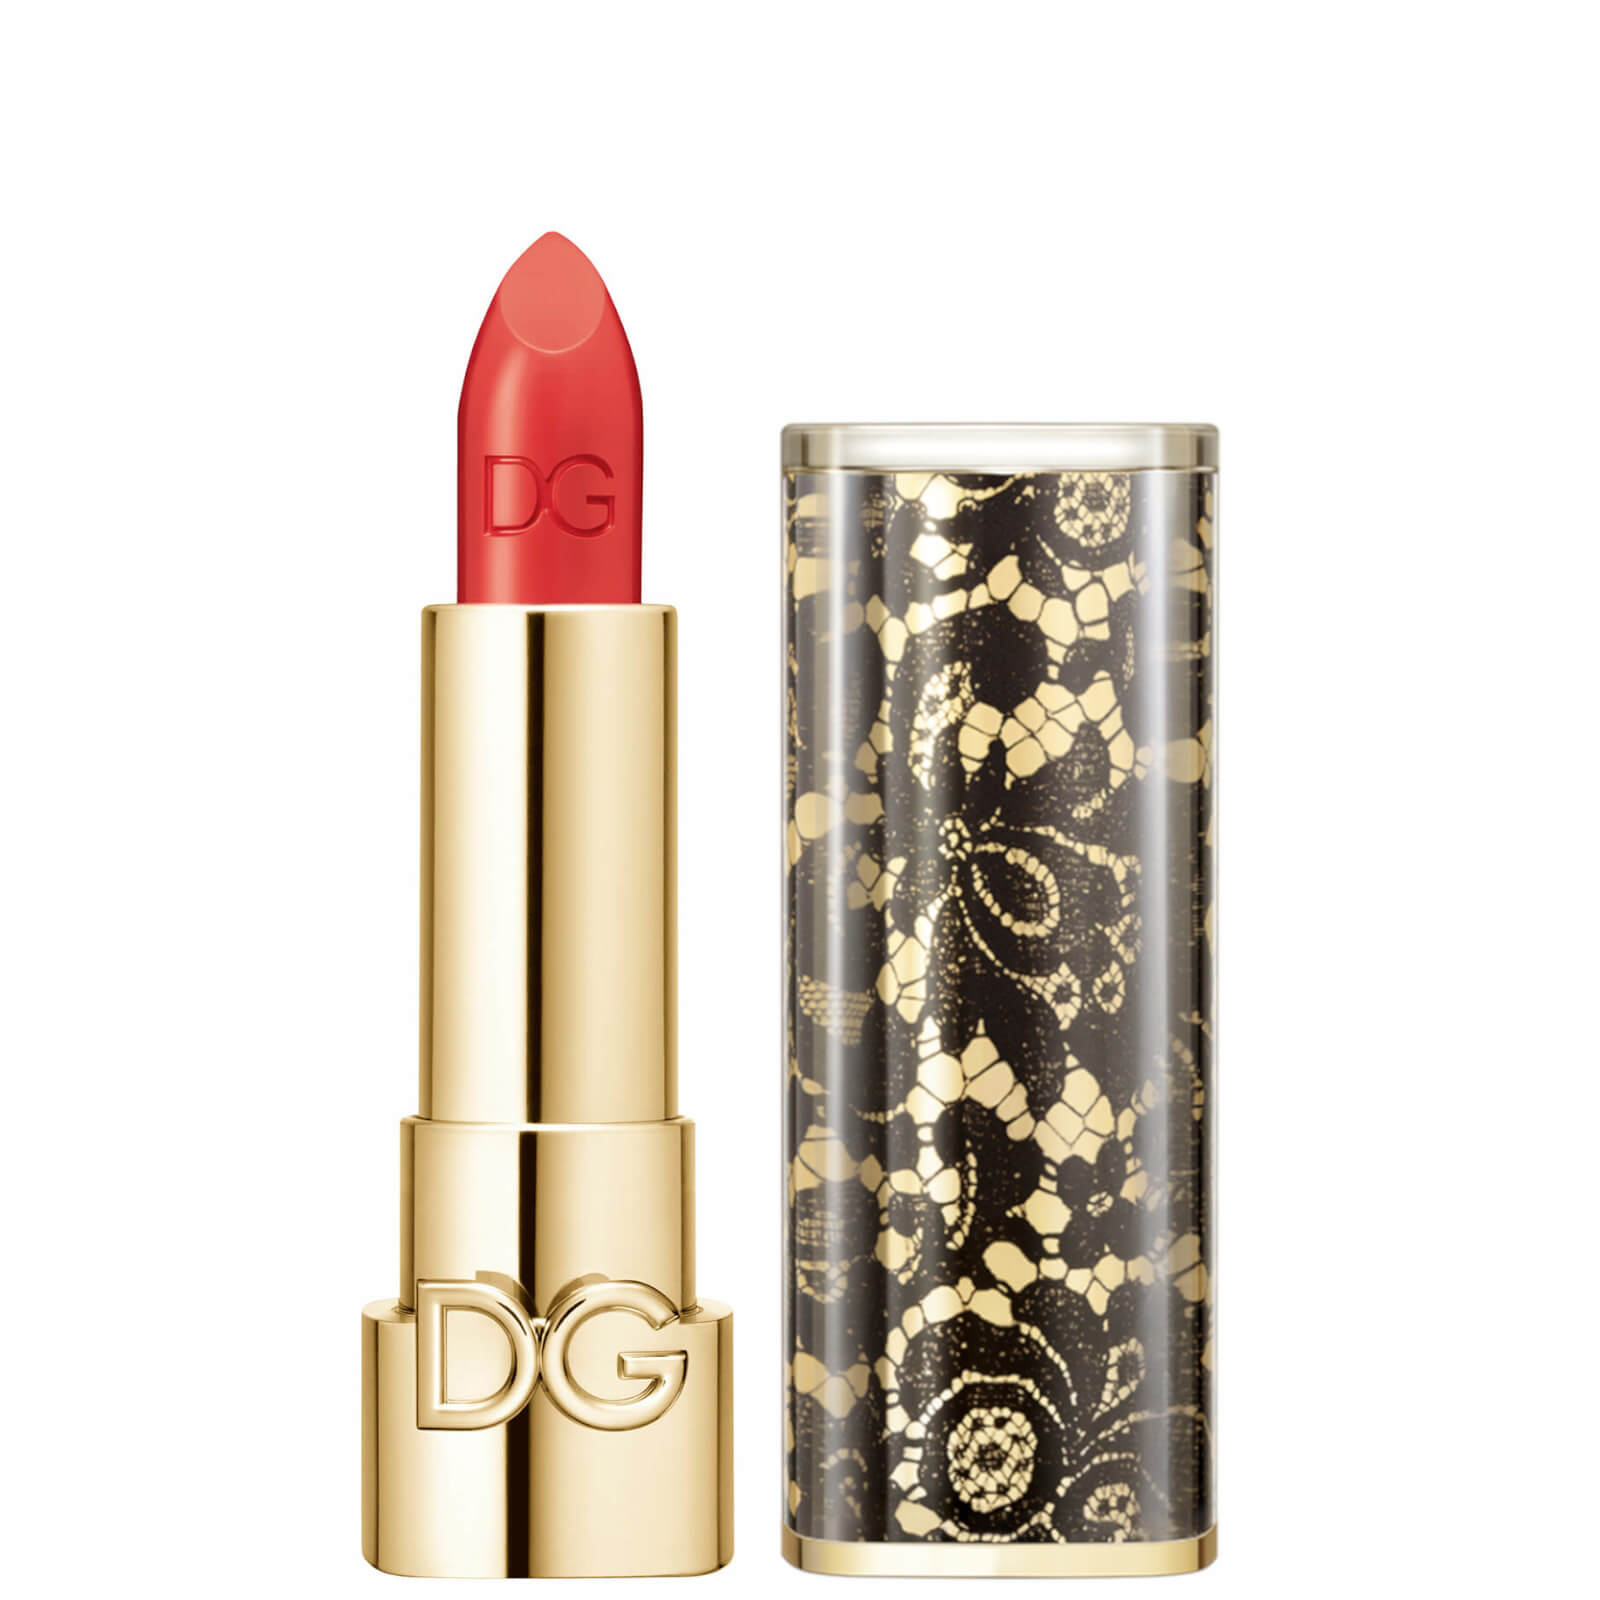 Dolce&Gabbana The Only One Lipstick + Cap (Lace) (Various Shades) - 600 Real Fire